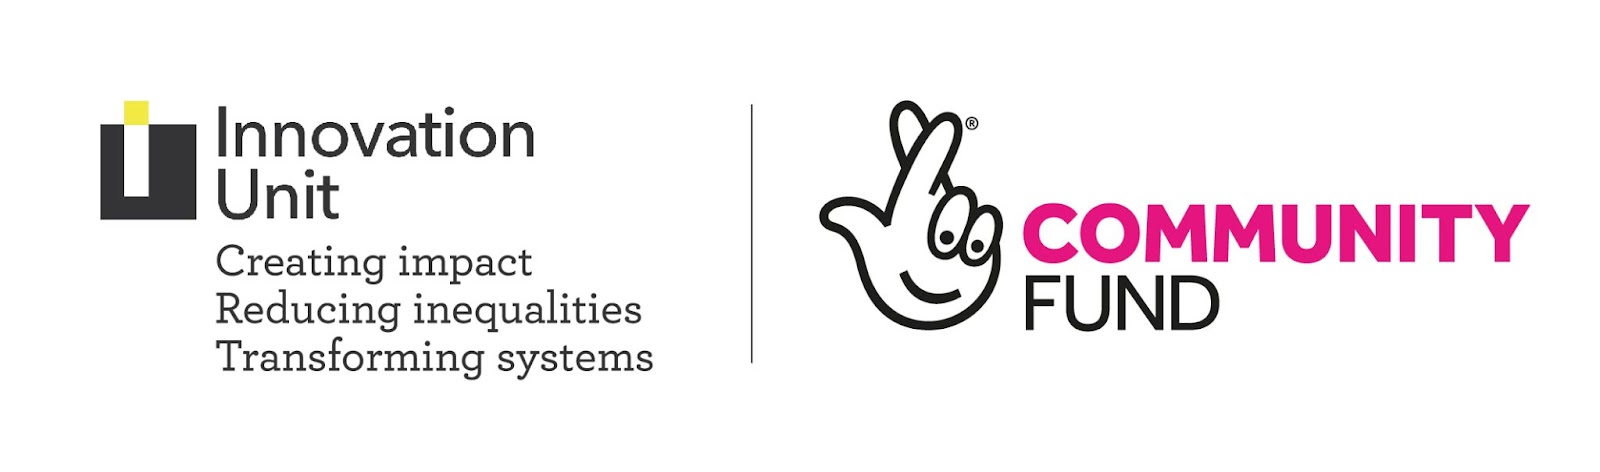 National Lottery Community Fund and Innovation unit logos